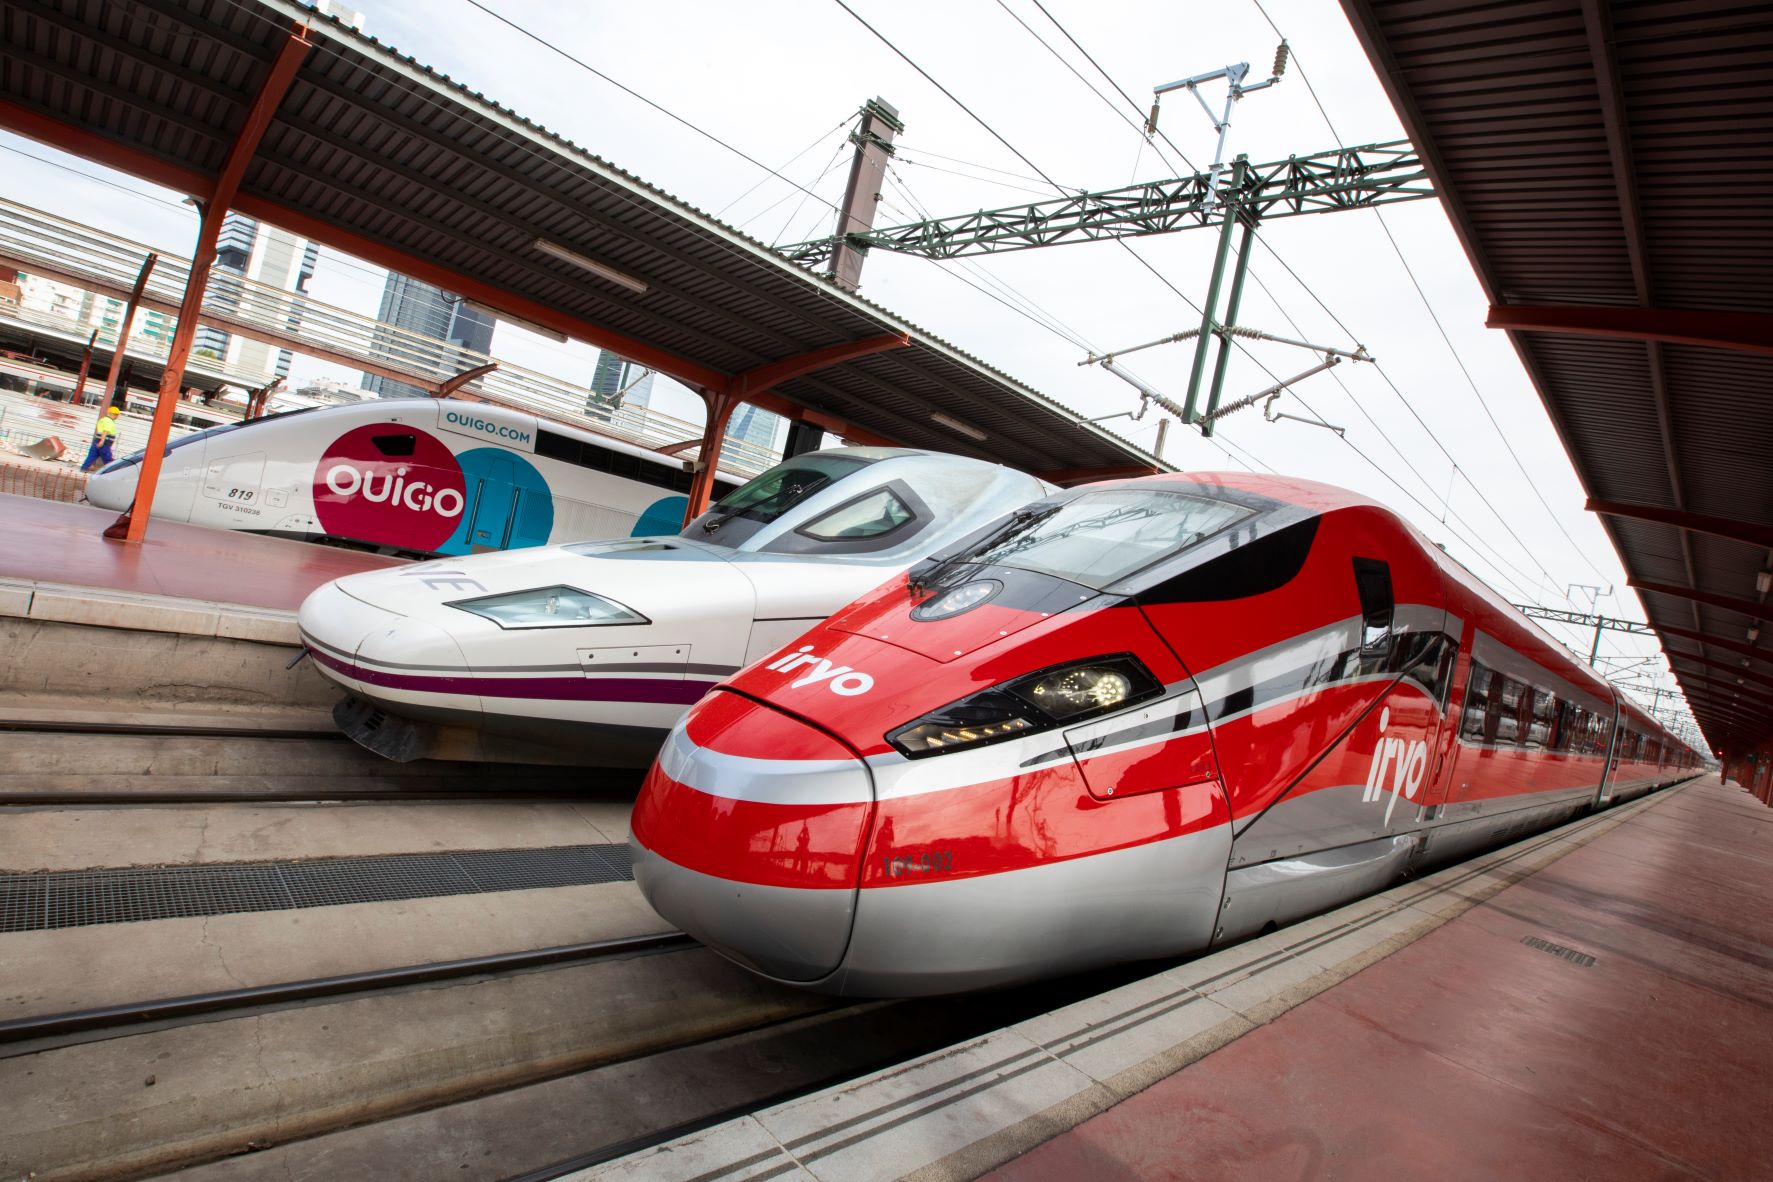 Iryo and Ouigo compete for the high-speed market on Madrid - Barcelona route